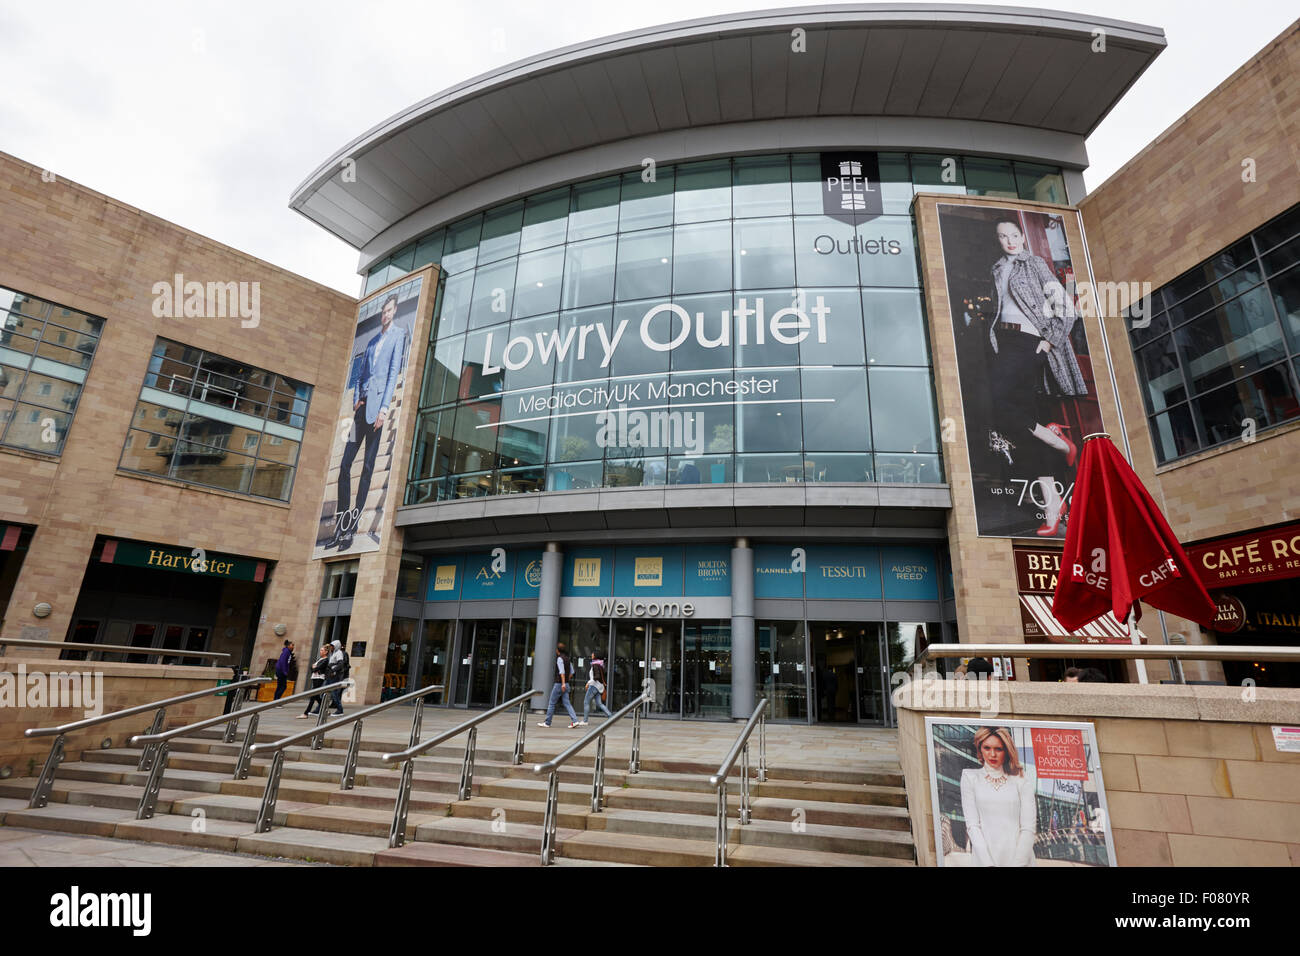 El Lowry outlet shopping mall Manchester uk Foto de stock